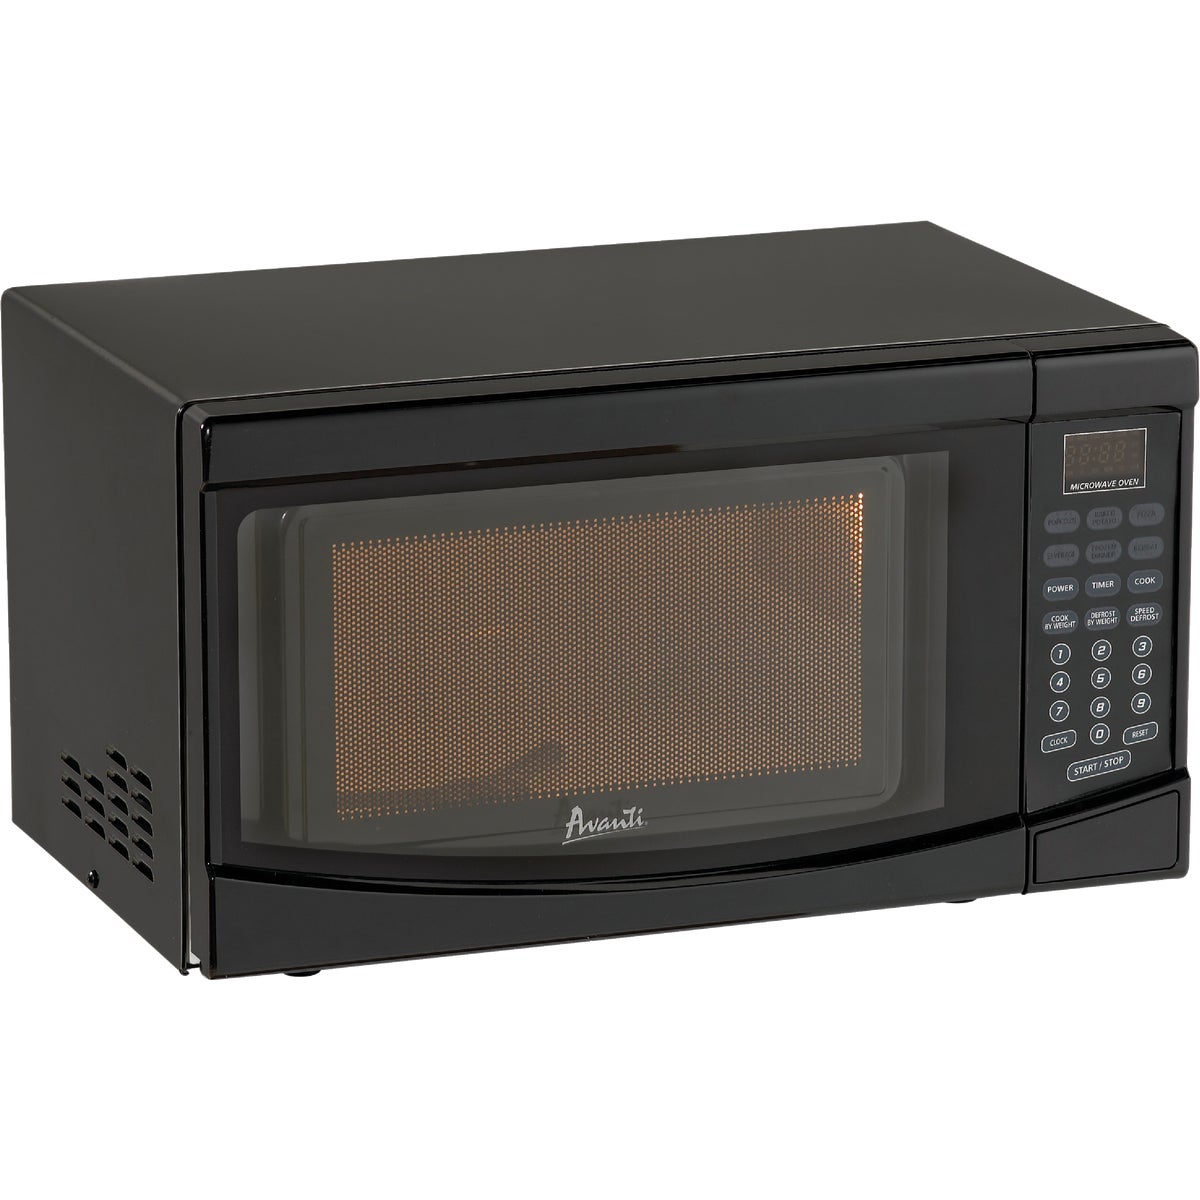 Item 603032, Counter top microwave features: electronic control panel with 9 power 